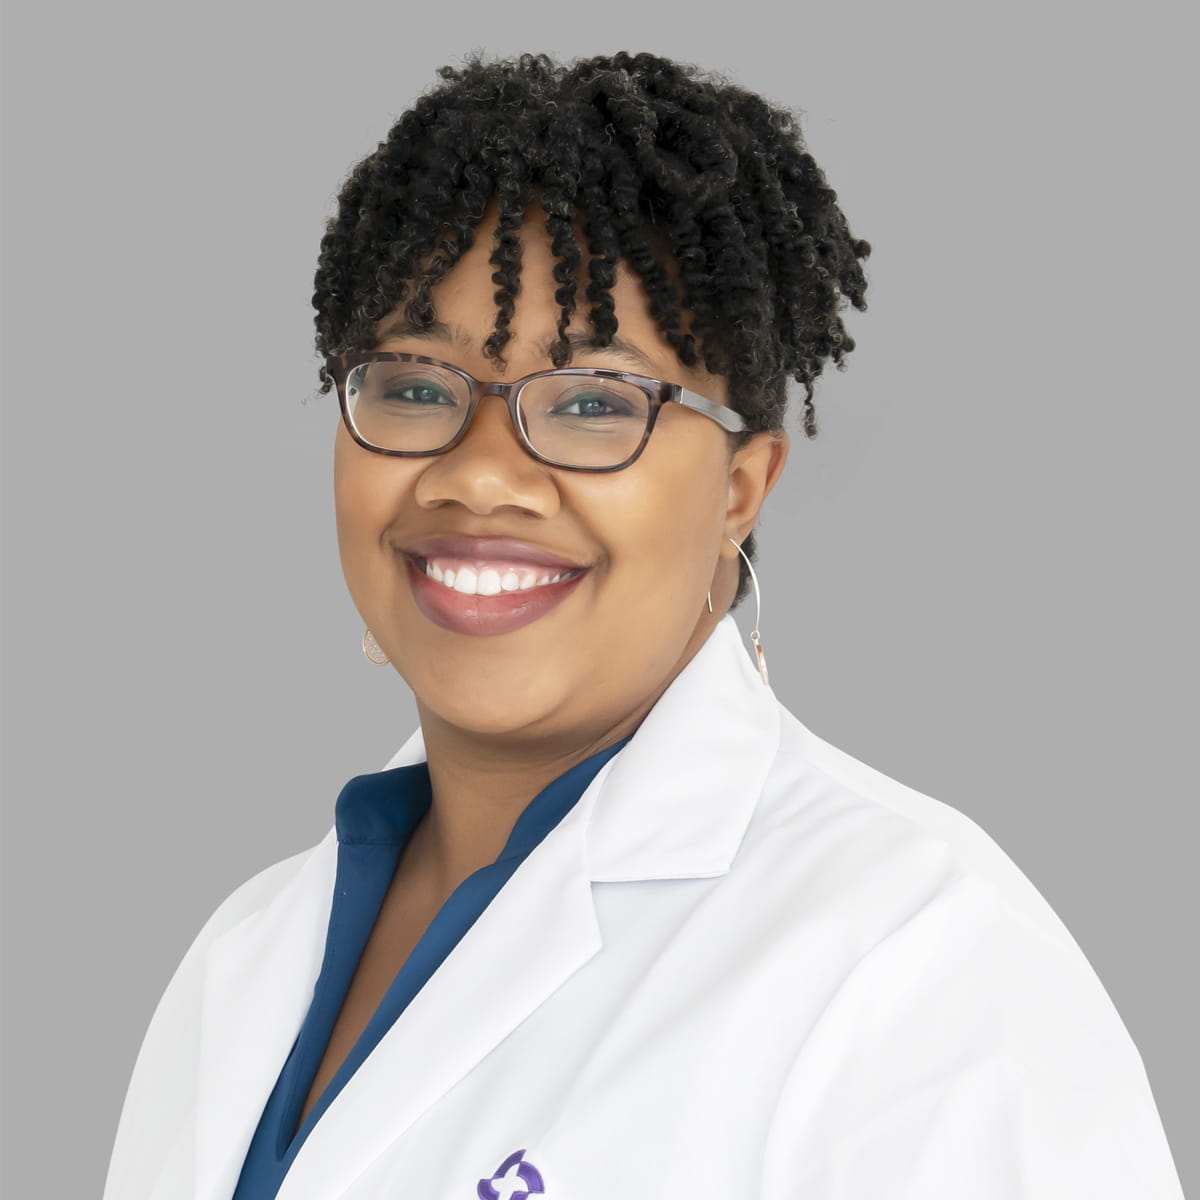 A friendly image of Bianca Mosley, MD